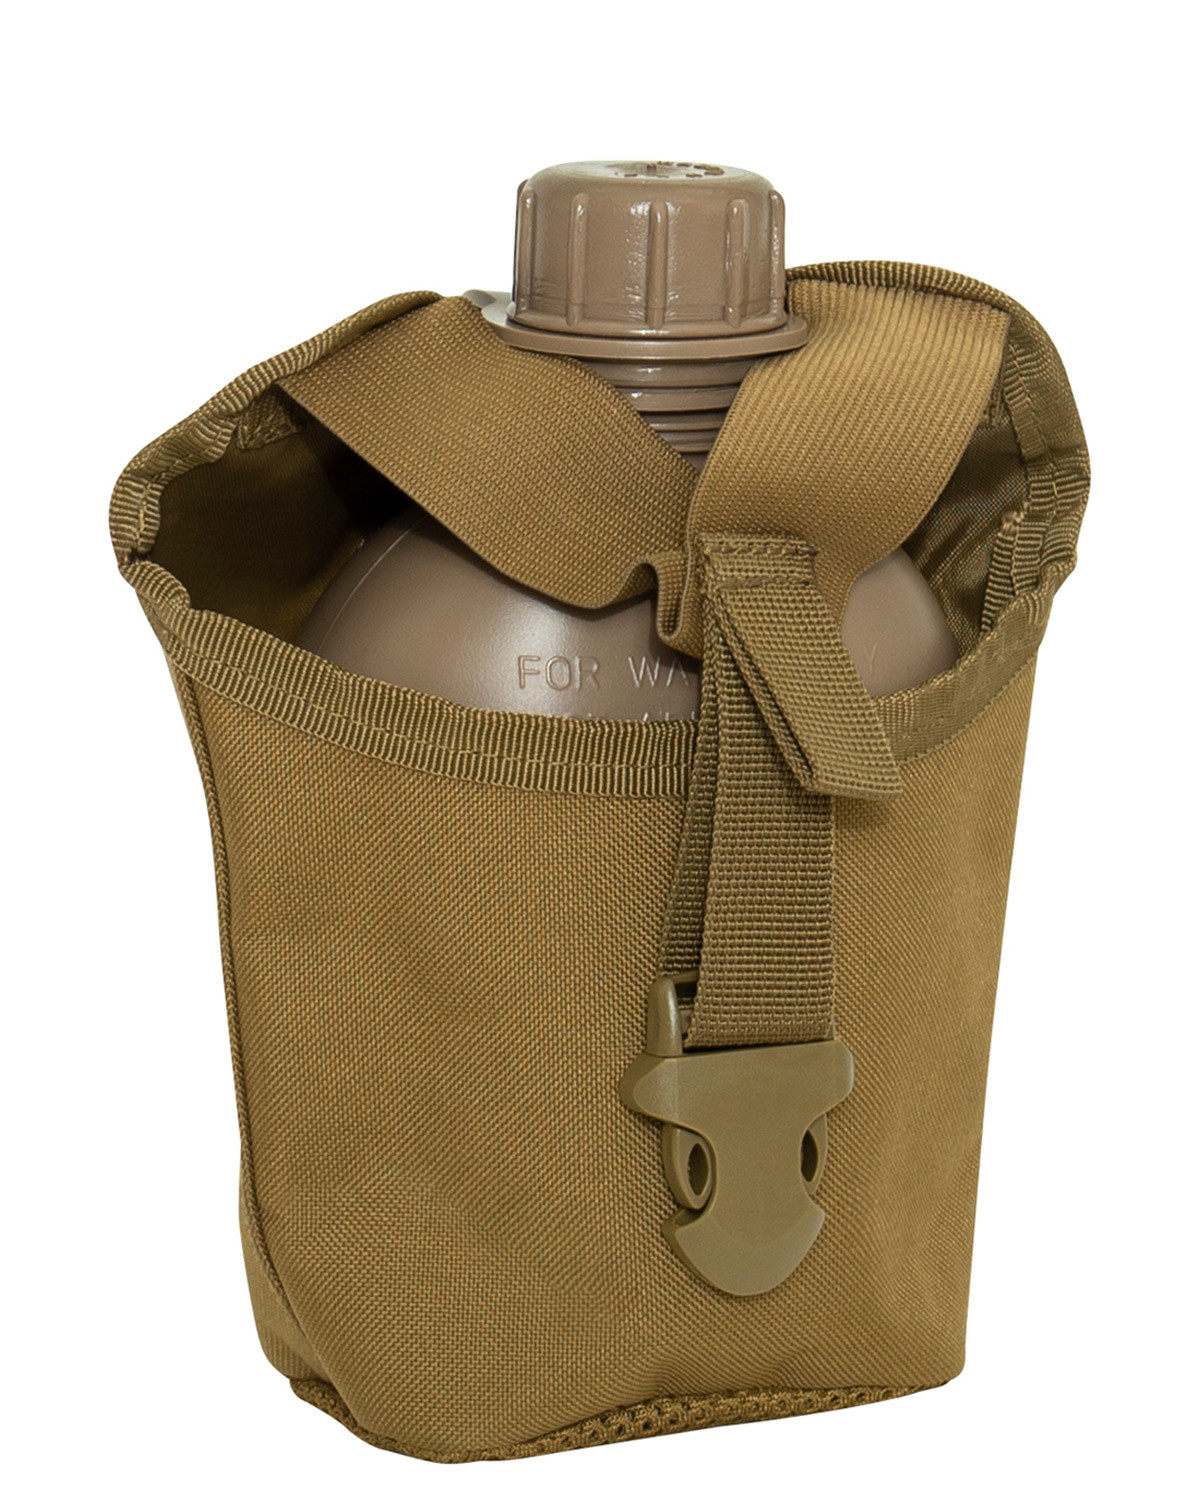 5: Rothco MOLLE Drikkedunk Etui 1 Liter (Coyote Brun, One Size)